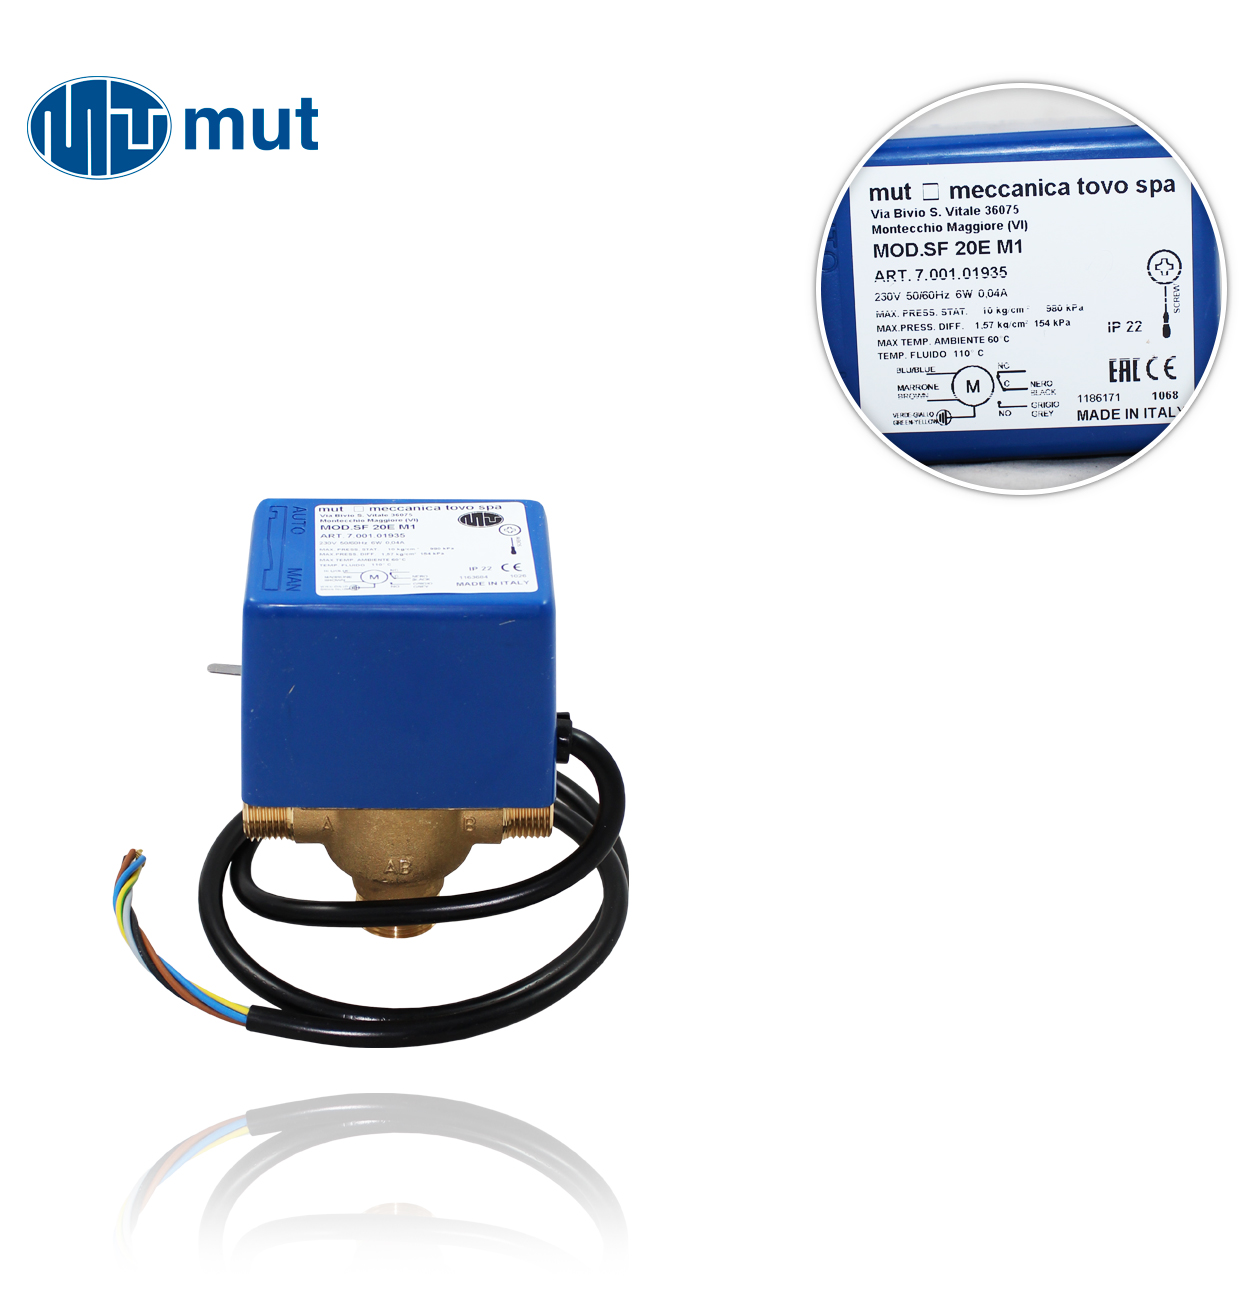 SF 20 E M1 MMM R3/4" 3-way MUT ZONE with 230V microswitch